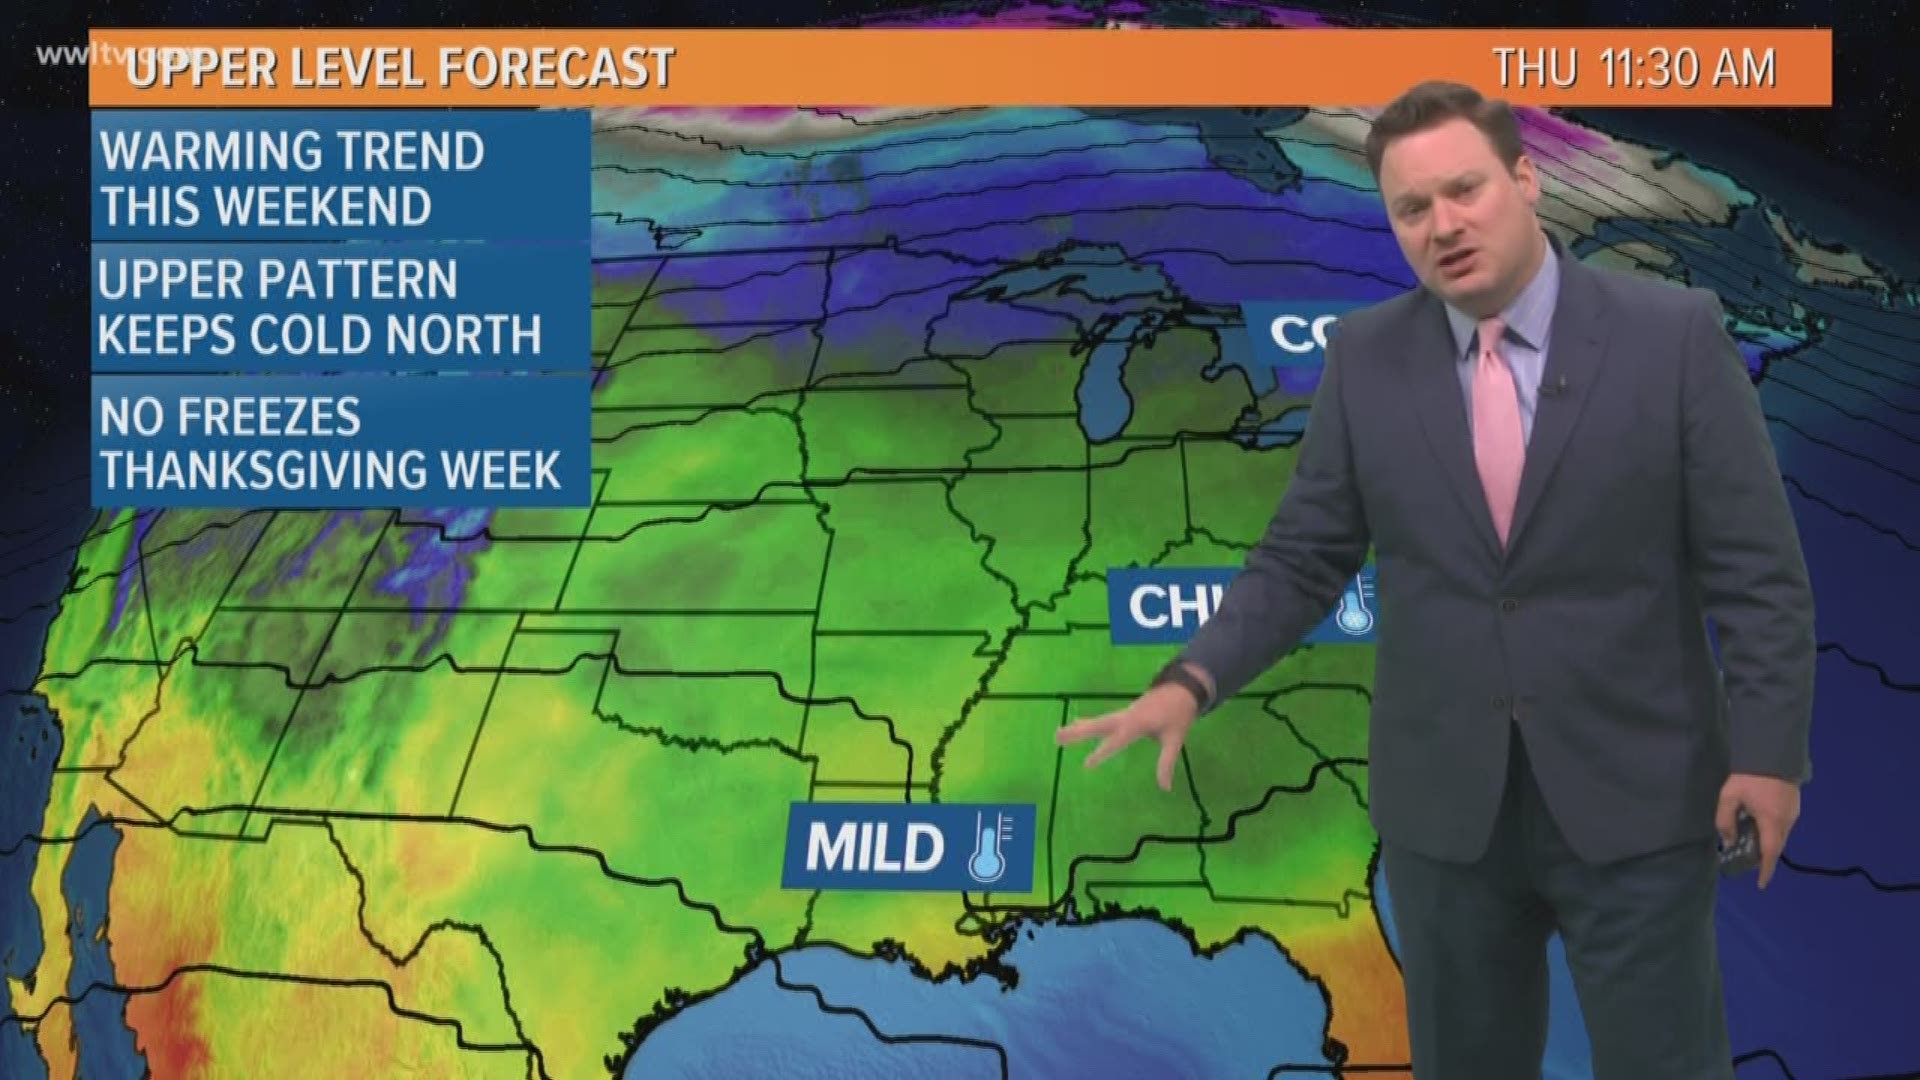 Meteorologist Chris Franklin looks at the warming trend through the weekend and ahead to the Thanksgiving forecast.